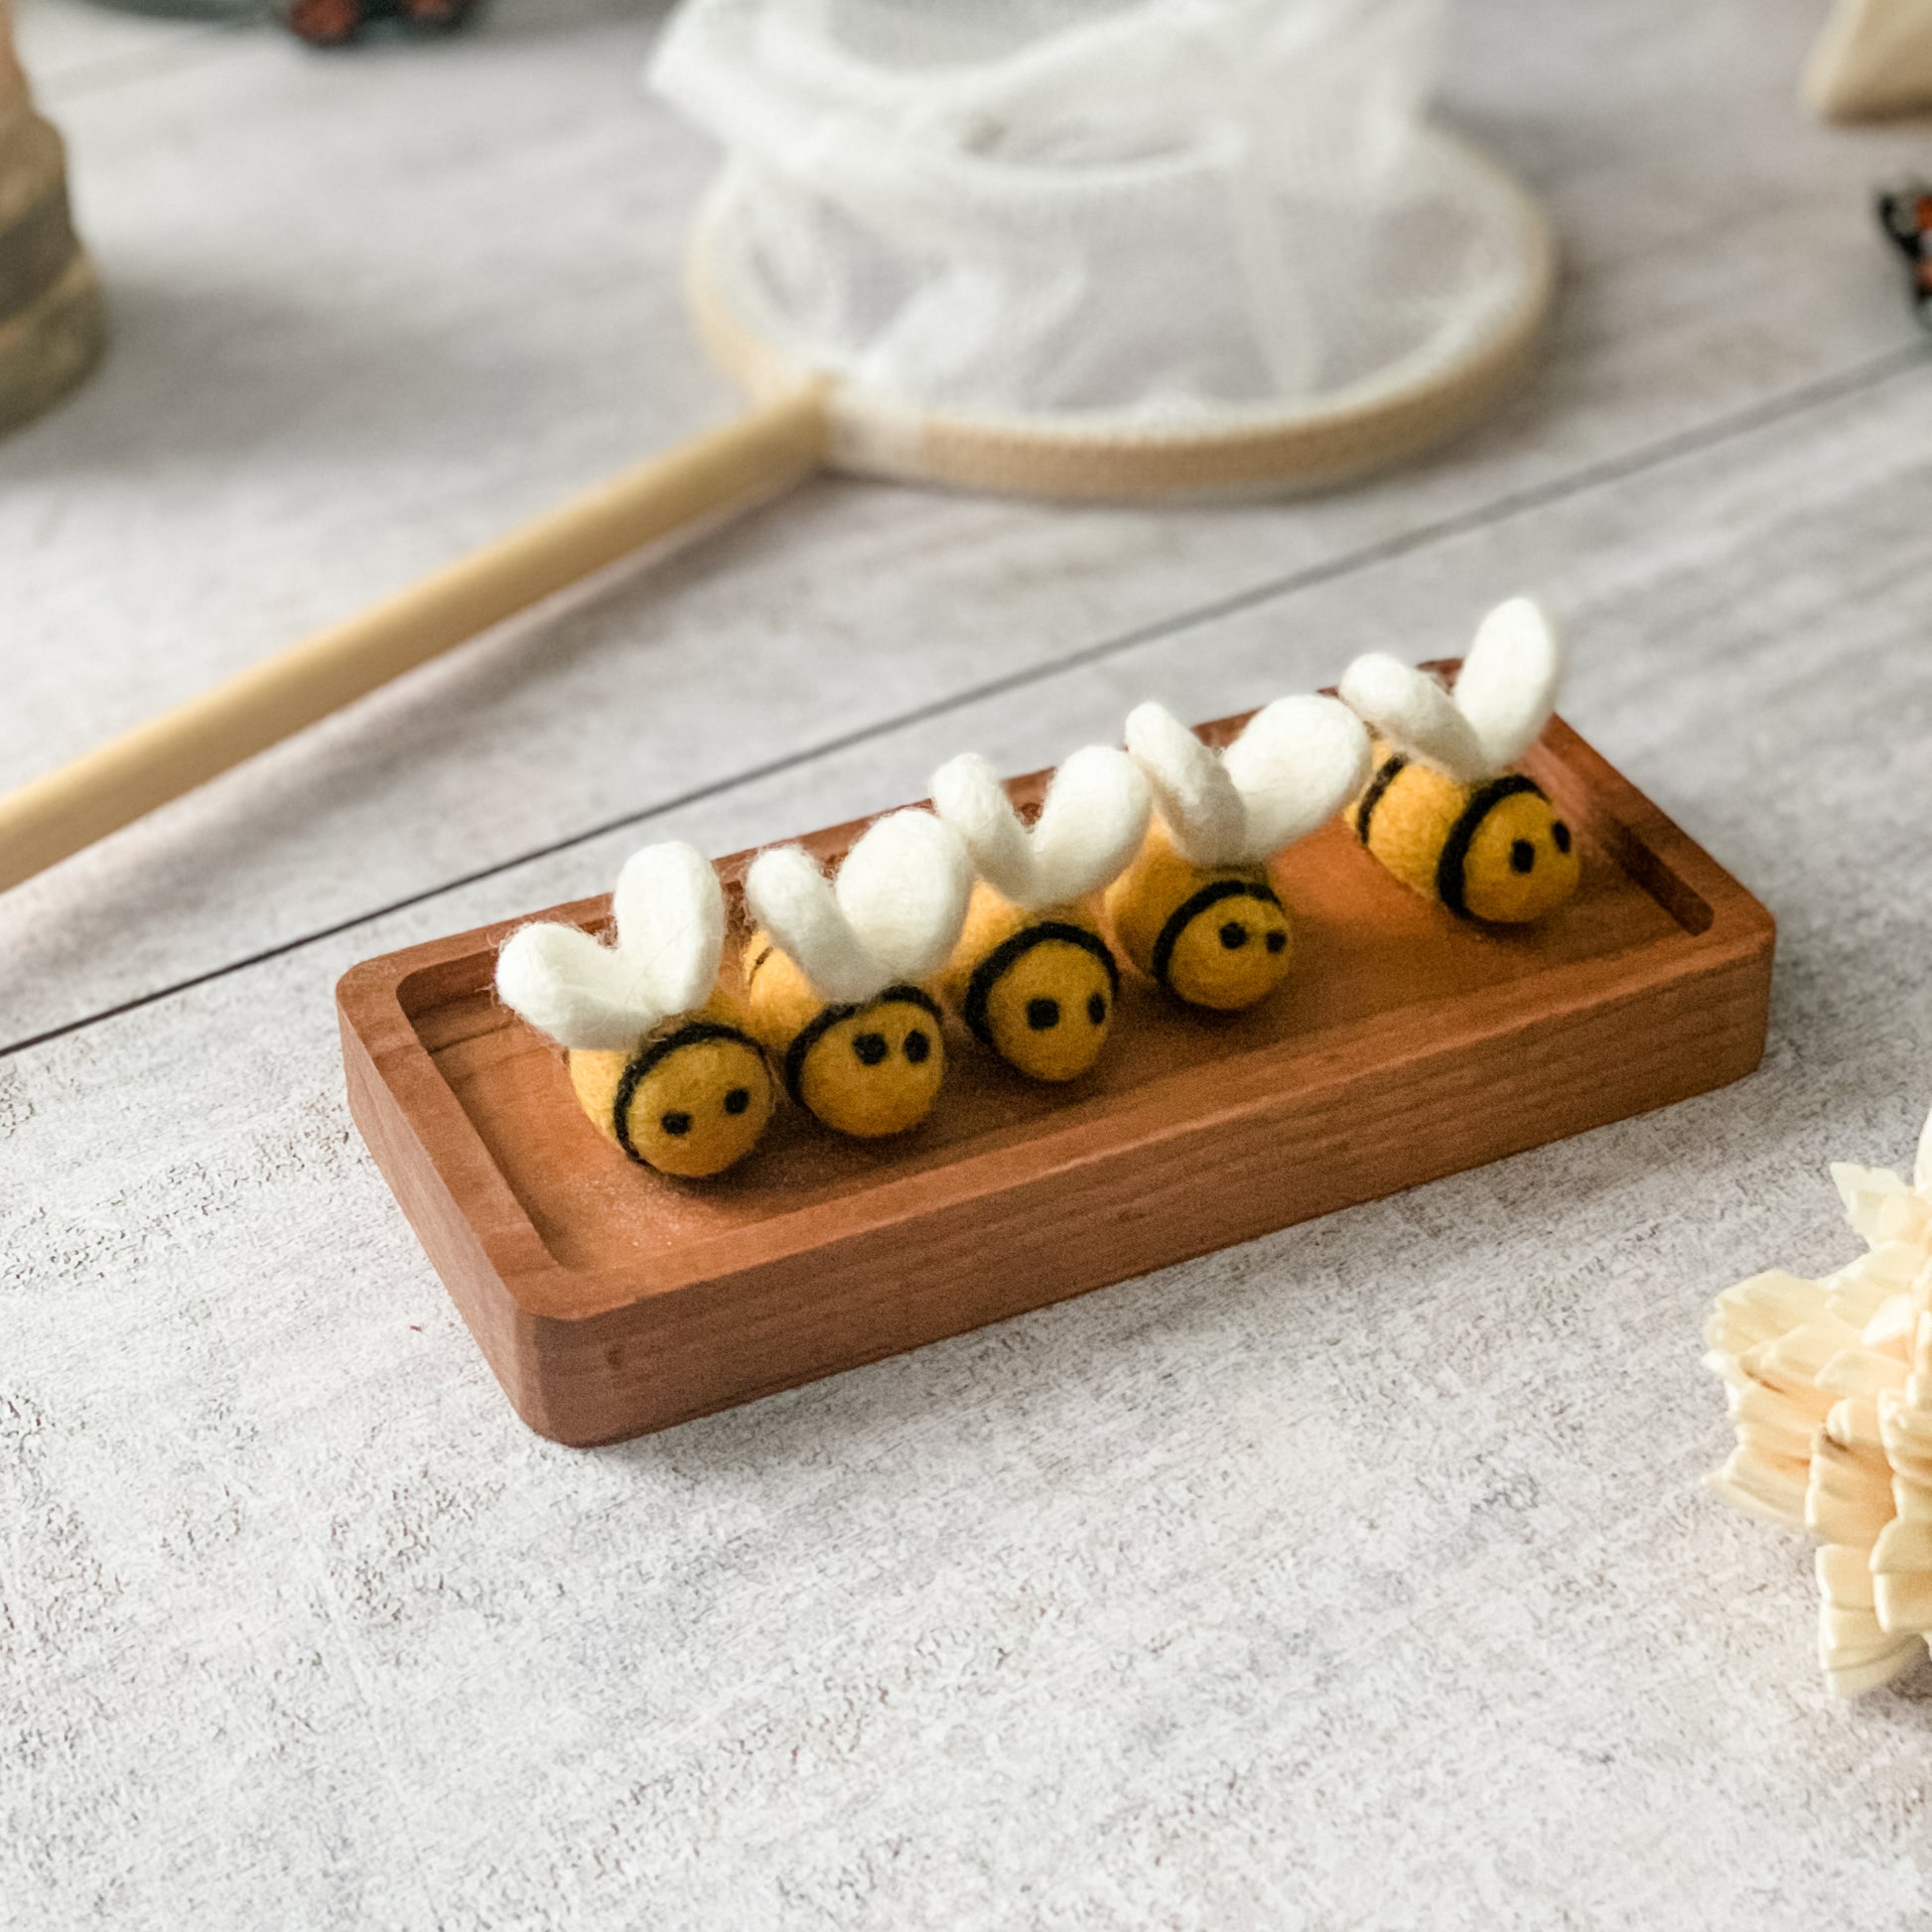 Felted Wool Bees - Chickadees Wooden Toys